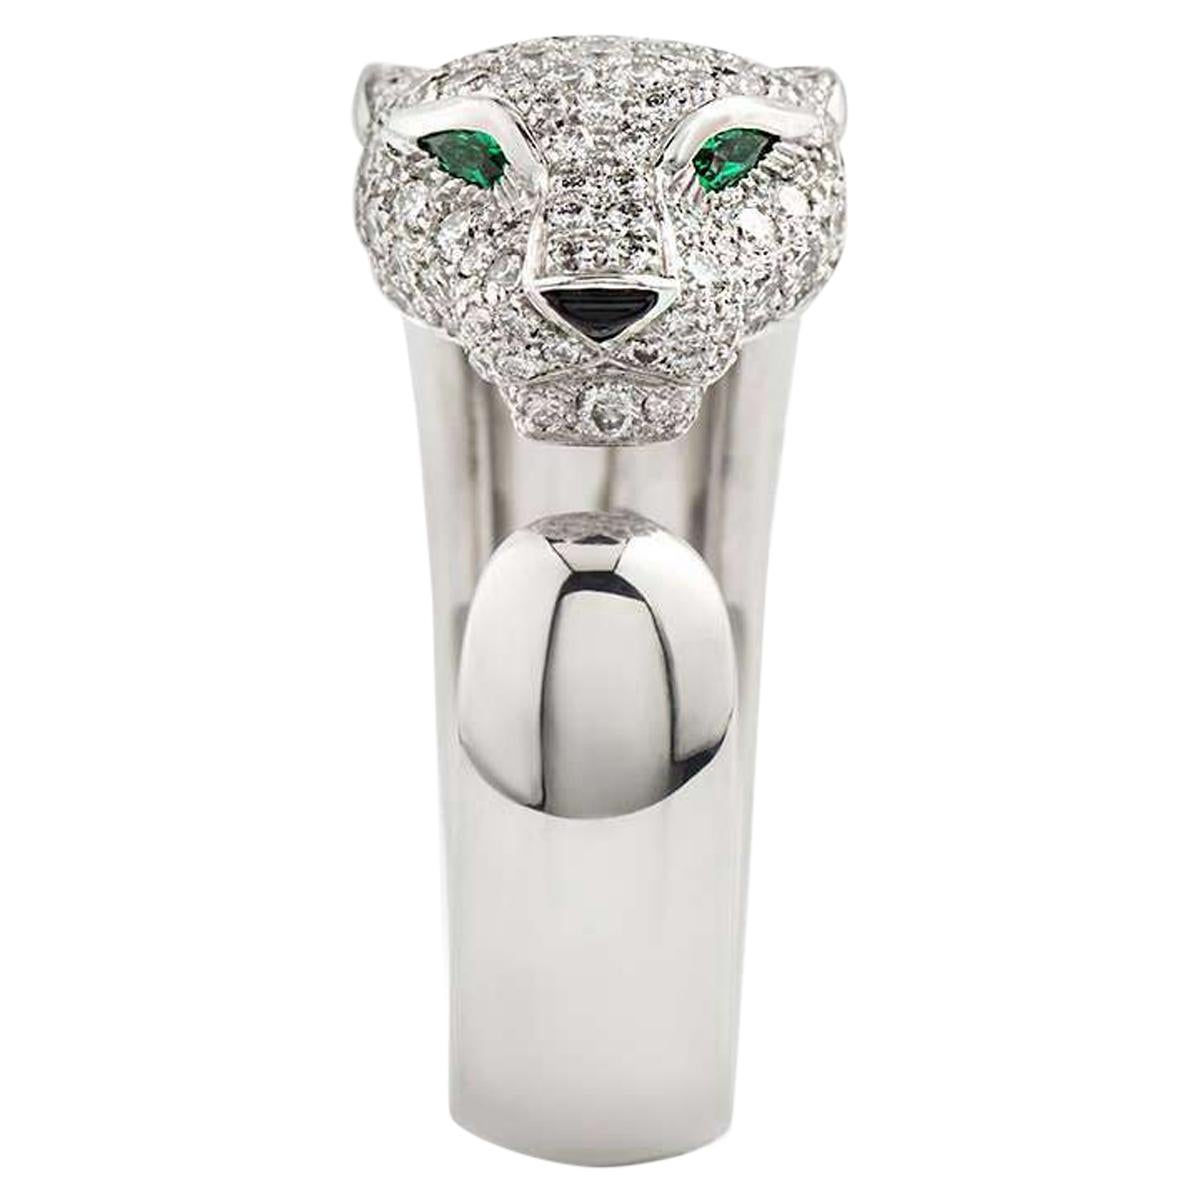 Cartier Panthere Diamond Emerald and Onyx Ring N4224900